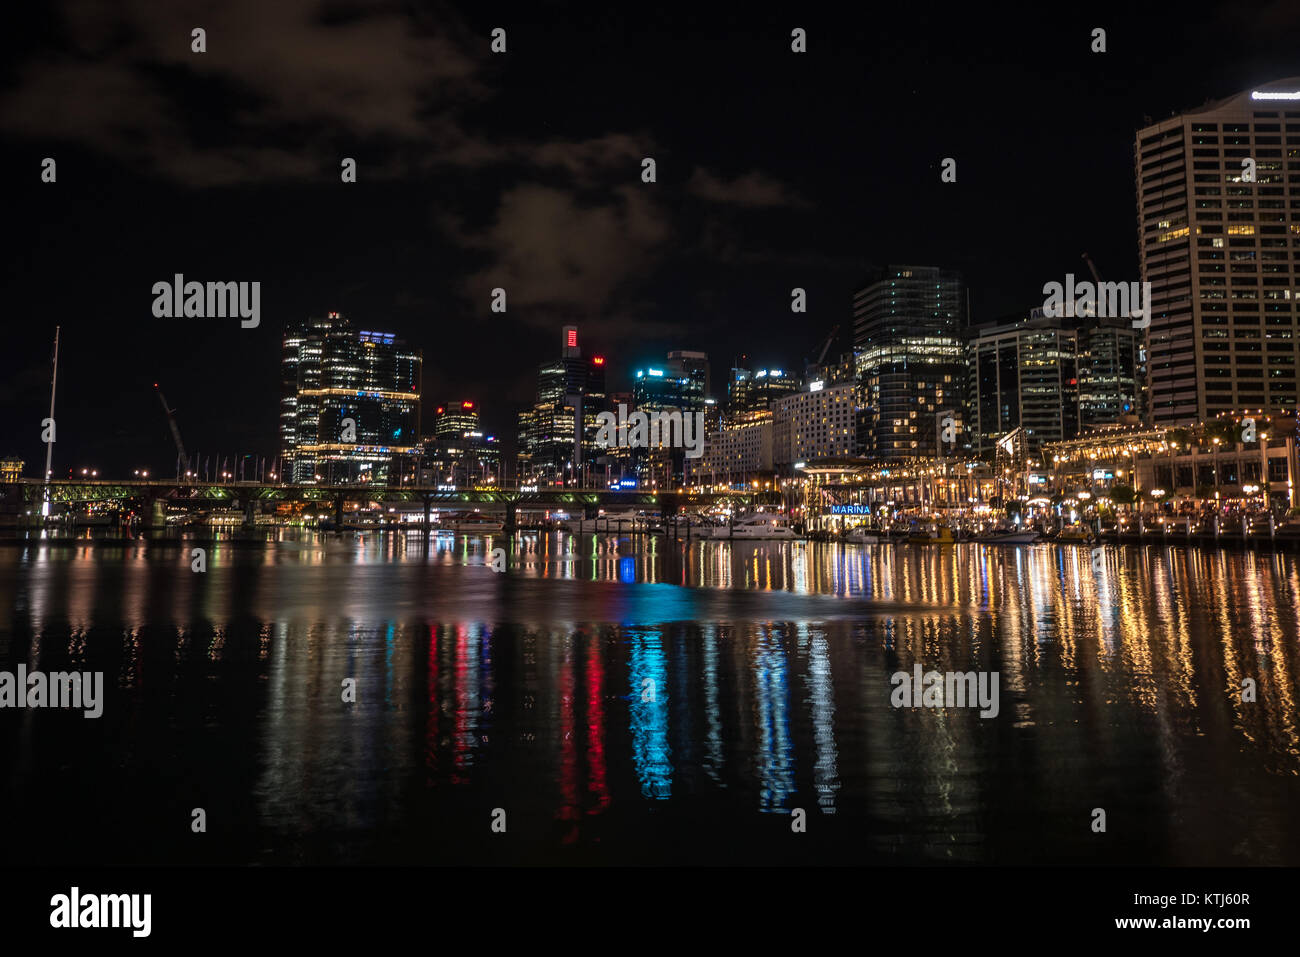 sydney darling harbour at night Stock Photo